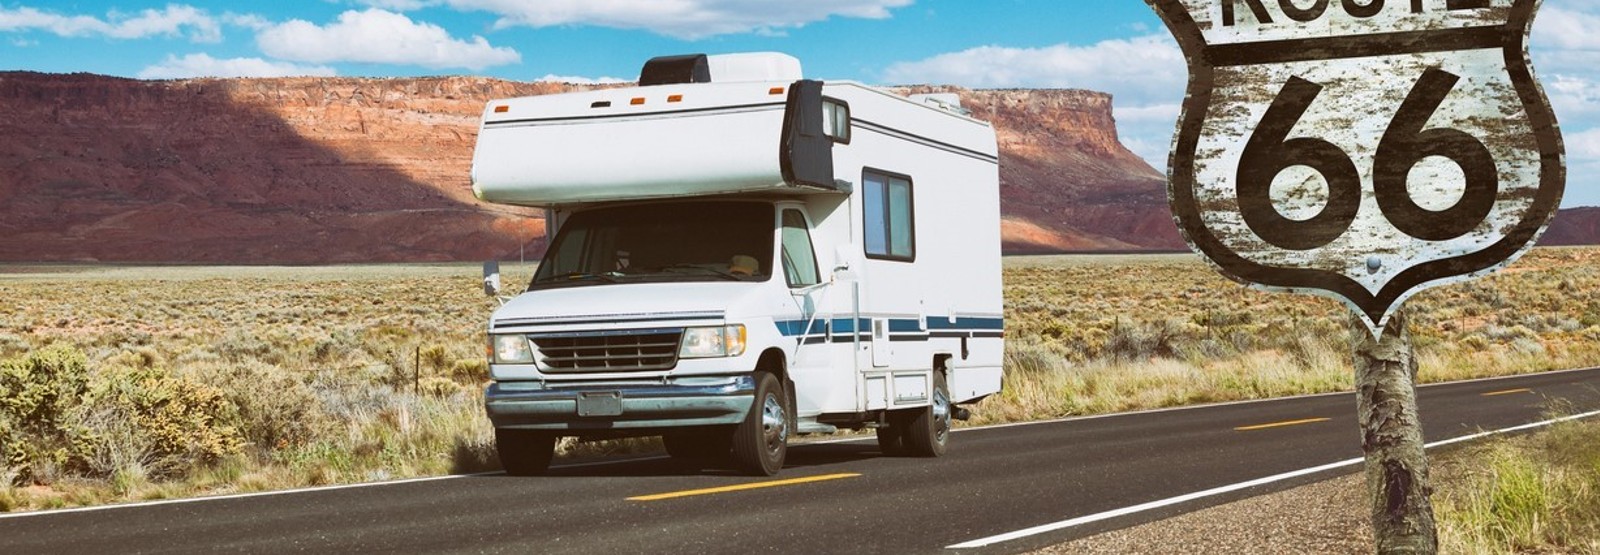 Image of RV driving and a Rt. 66 sign. 